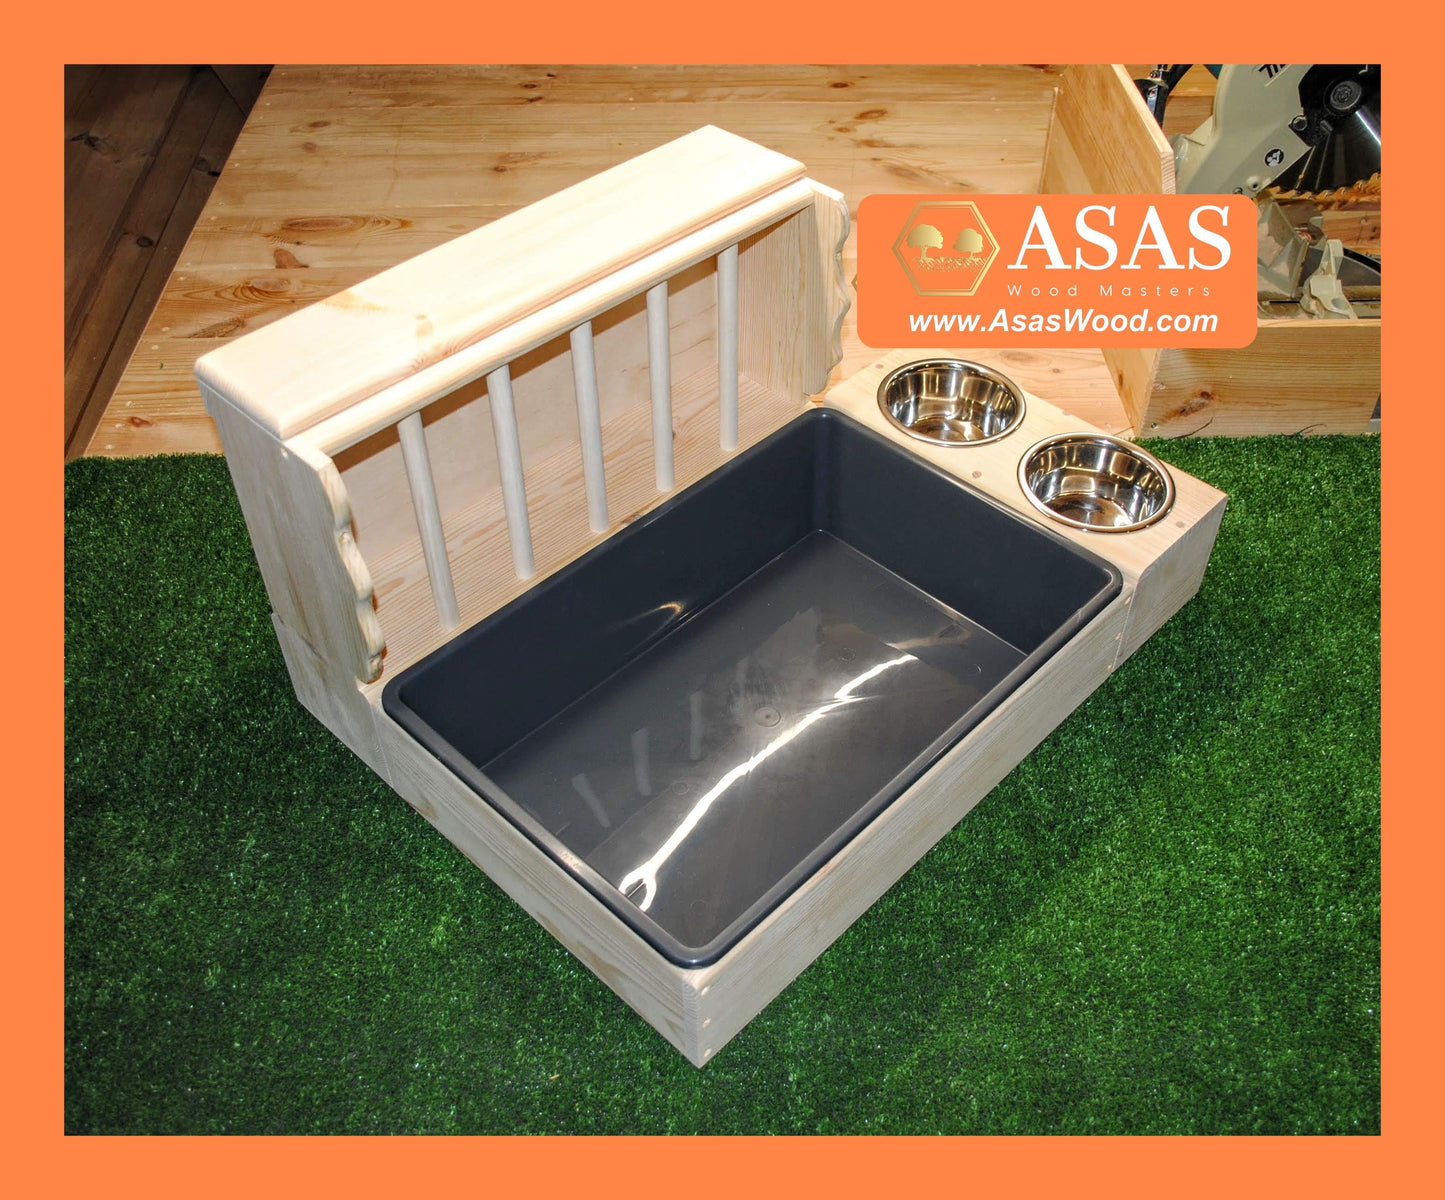 rabbit hay feeder with litter box and food dishes stand, made by asaswood